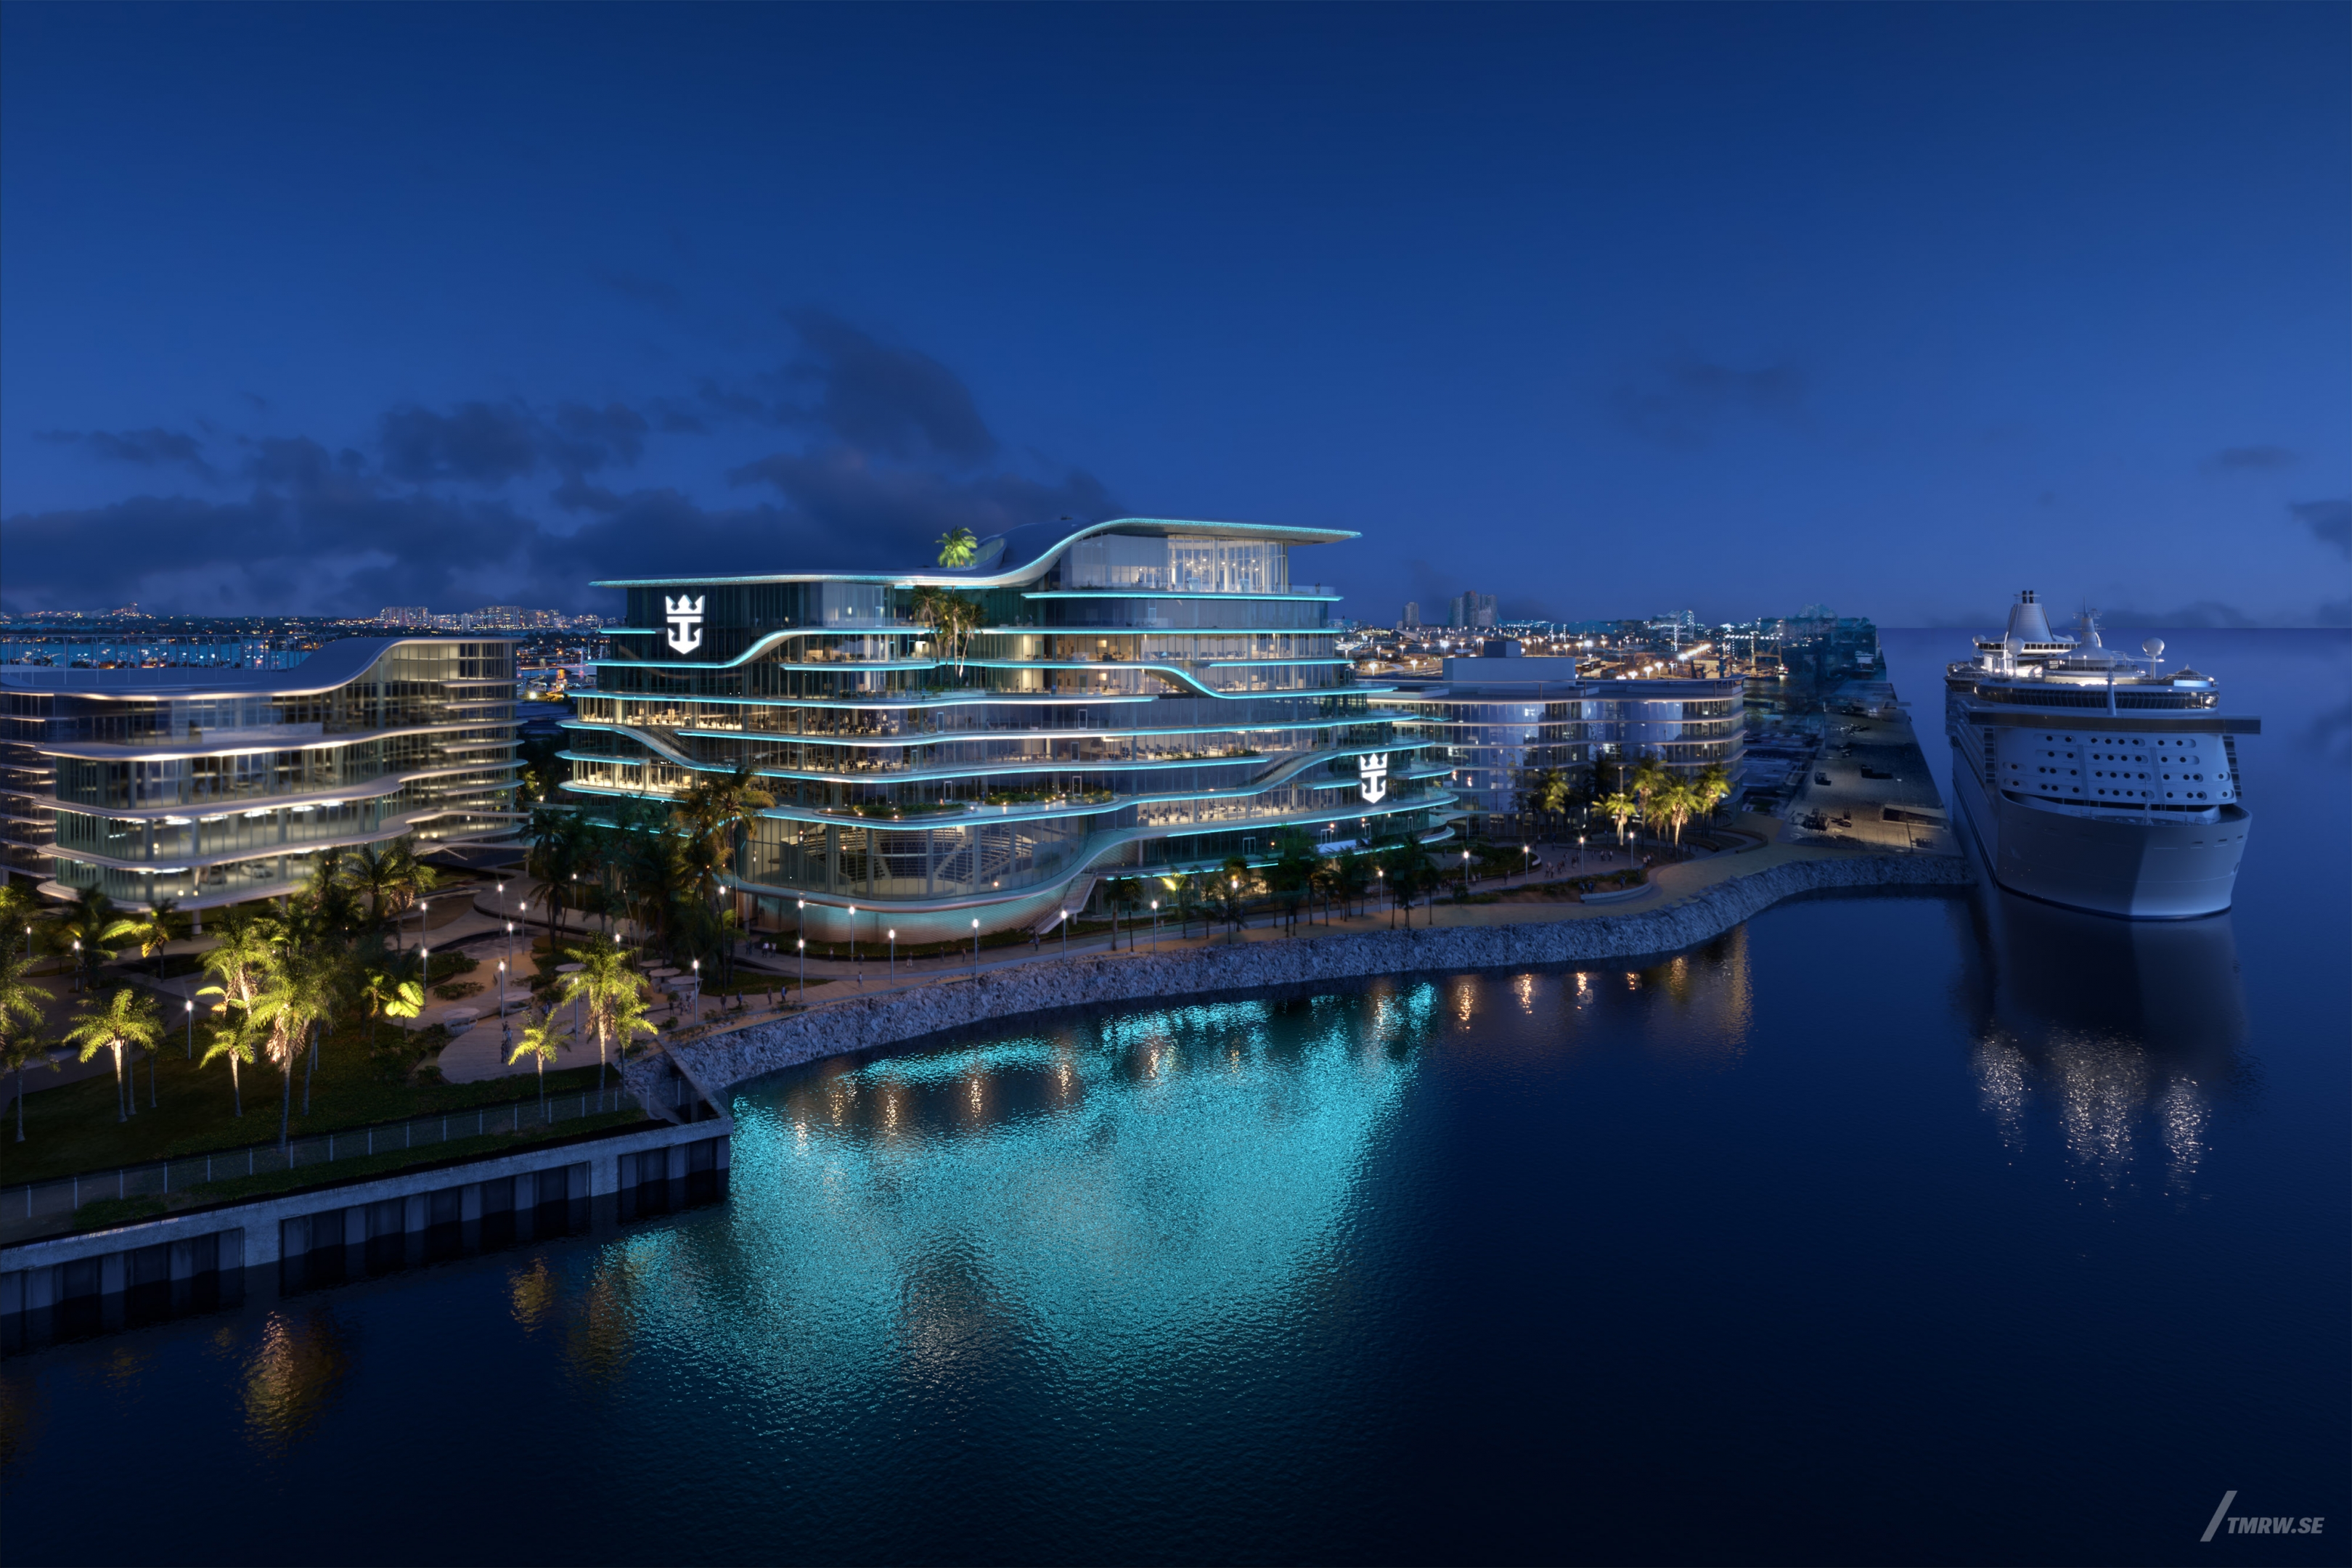 Architectural visualization of Royal Caribbean for HOK. An image of a building in front of a cruise ship with strings of lights along the edges. The picture is from an aerial view in night light.